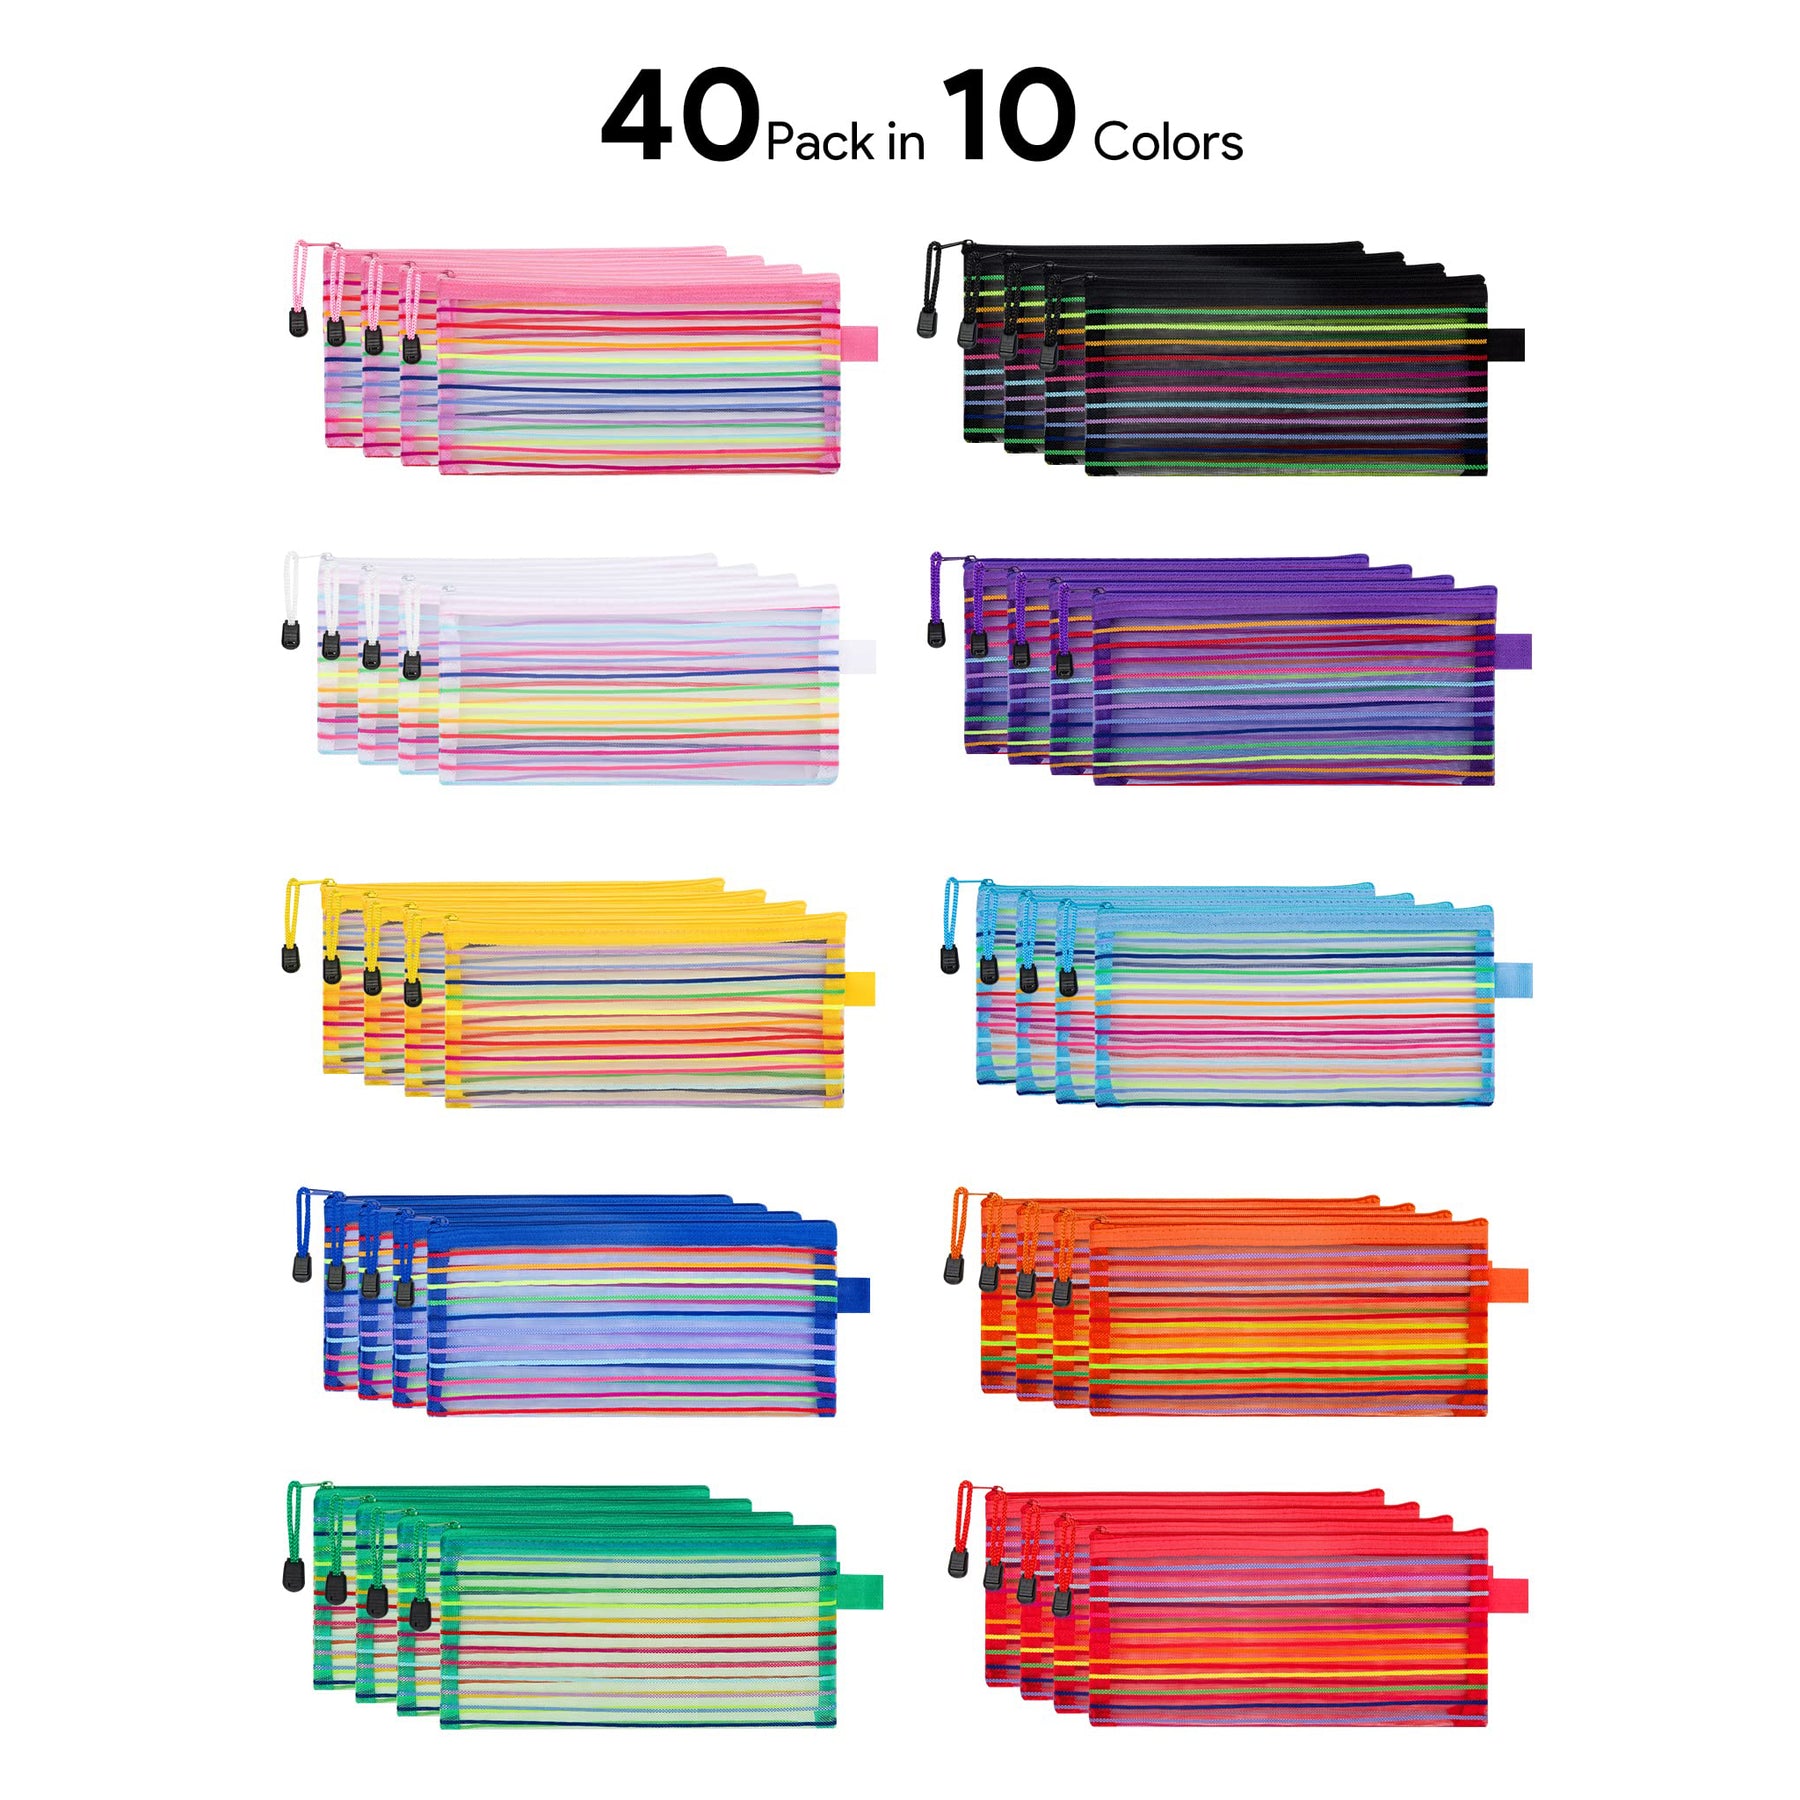 JARLINK 40 Pack 10 Colors Zipper Mesh Pouch, Storage Pouches Multipurpose Travel Bags for Office Supplies Cosmetics Travel Accessories Multicolor